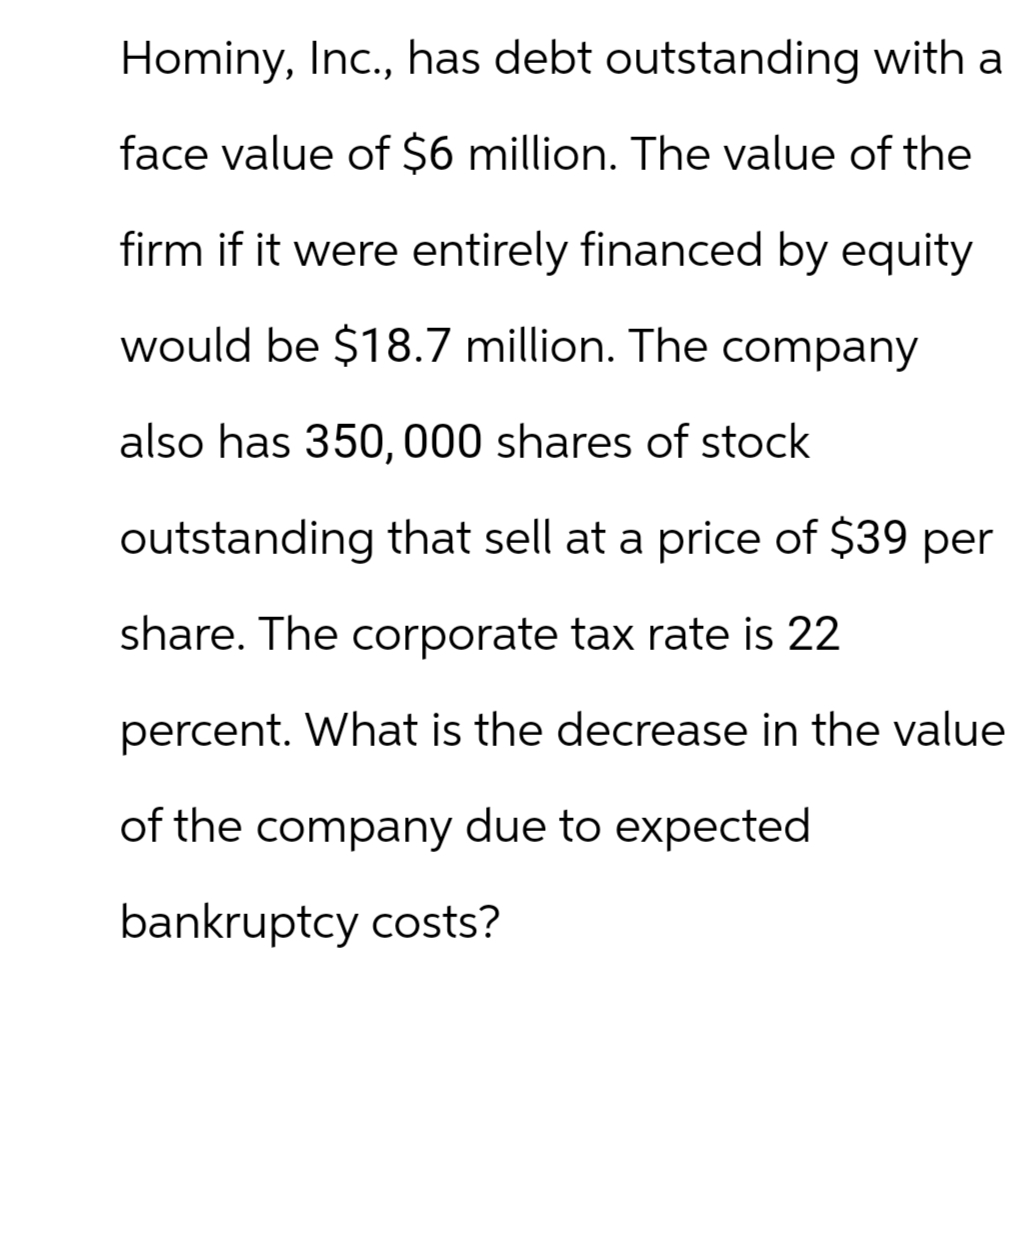 Hominy, Inc., has debt outstanding with a
face value of $6 million. The value of the
firm if it were entirely financed by equity
would be $18.7 million. The company
also has 350,000 shares of stock
outstanding that sell at a price of $39 per
share. The corporate tax rate is 22
percent. What is the decrease in the value
of the company due to expected
bankruptcy costs?